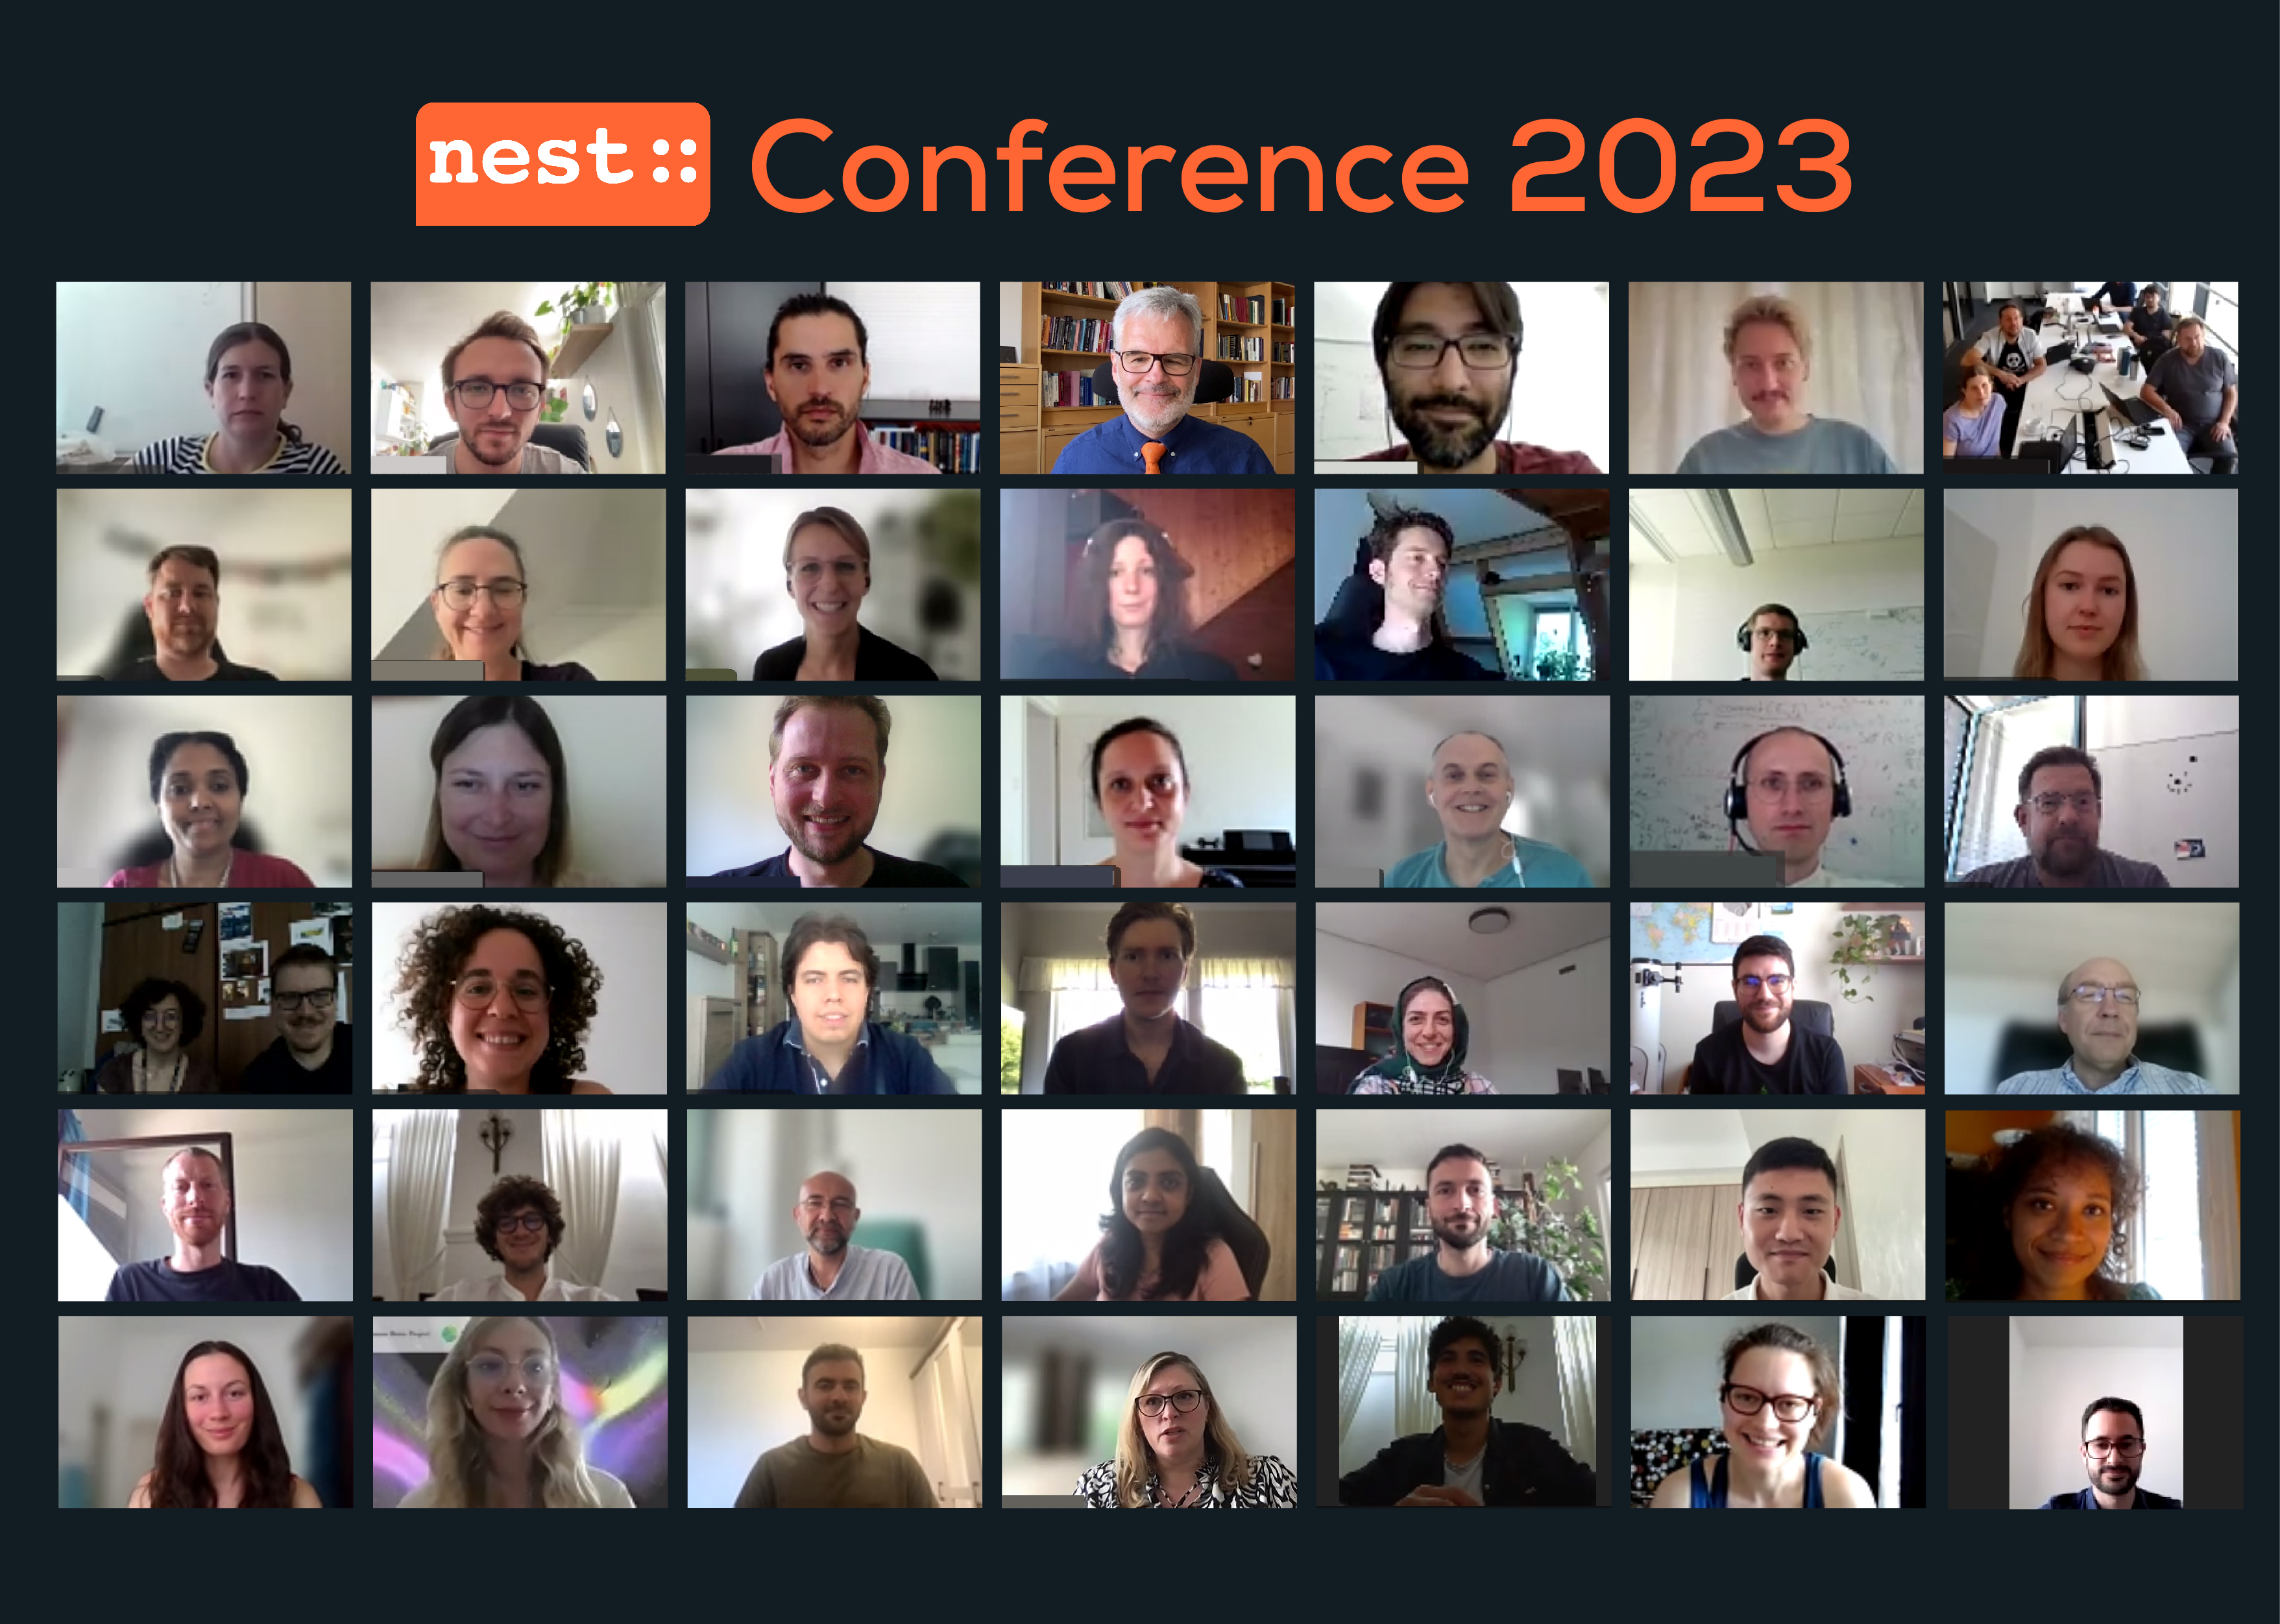 NEST Conference 2023